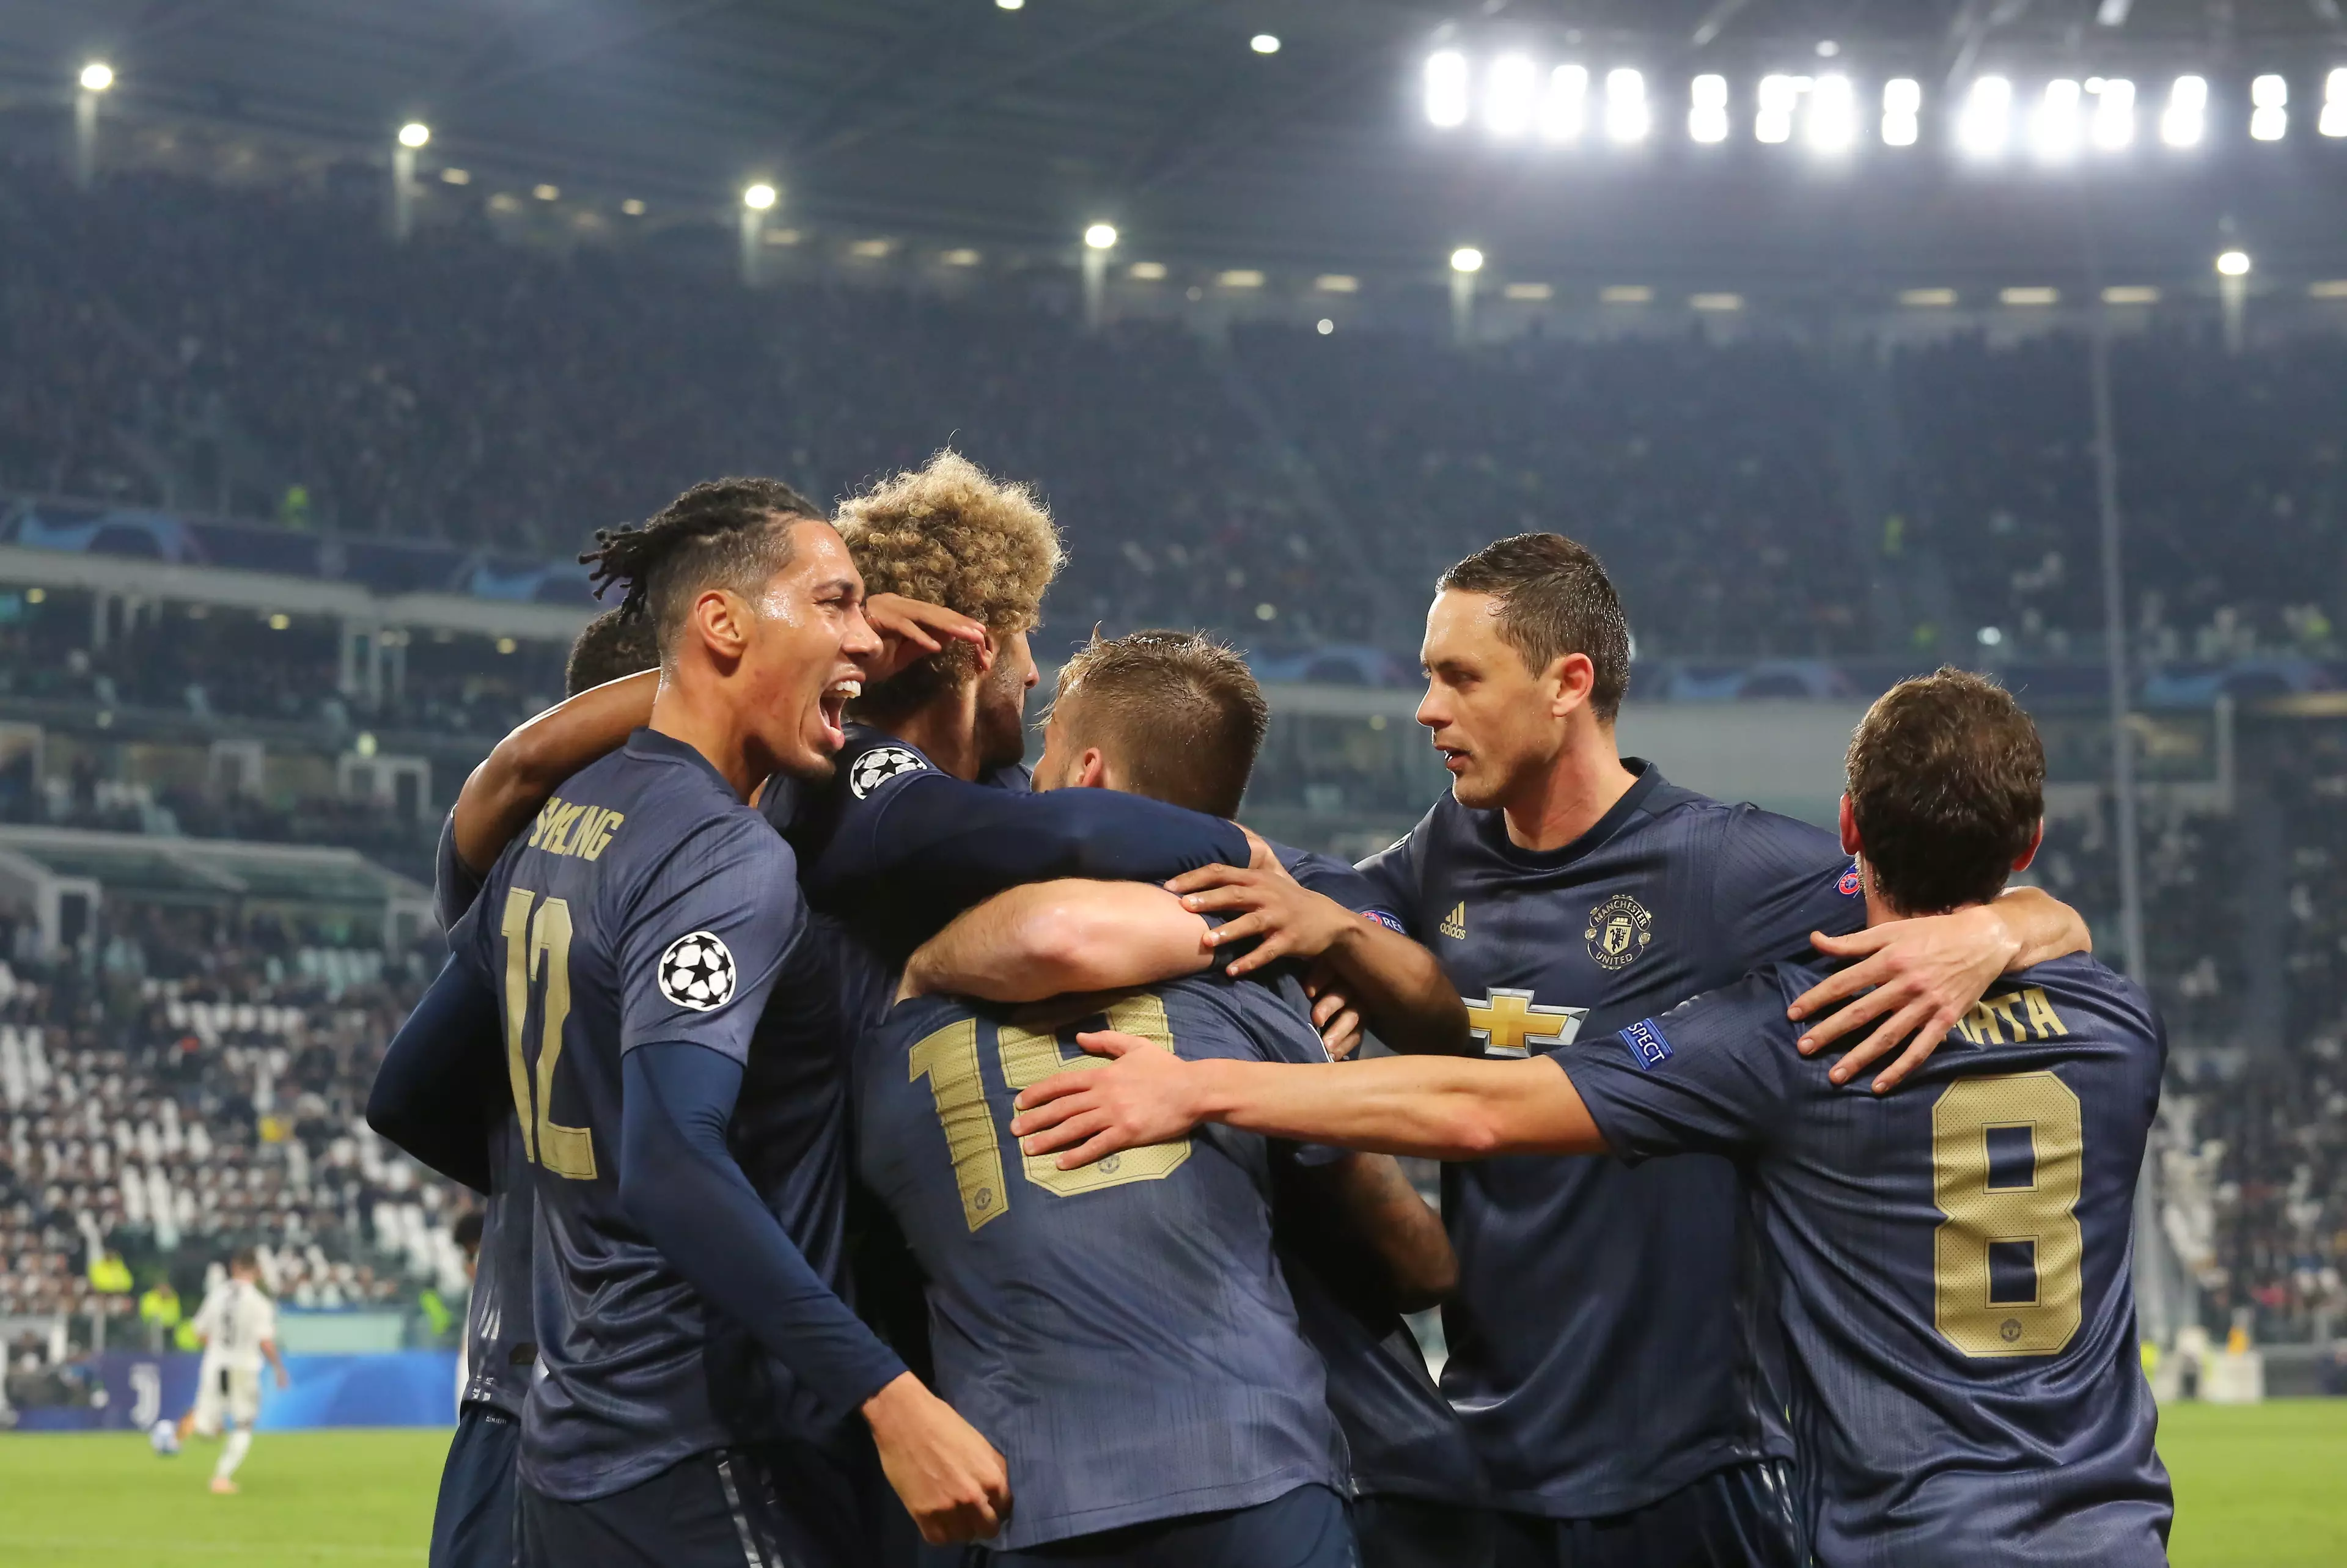 Manchester United players celebrate after their winner vs Juventus (